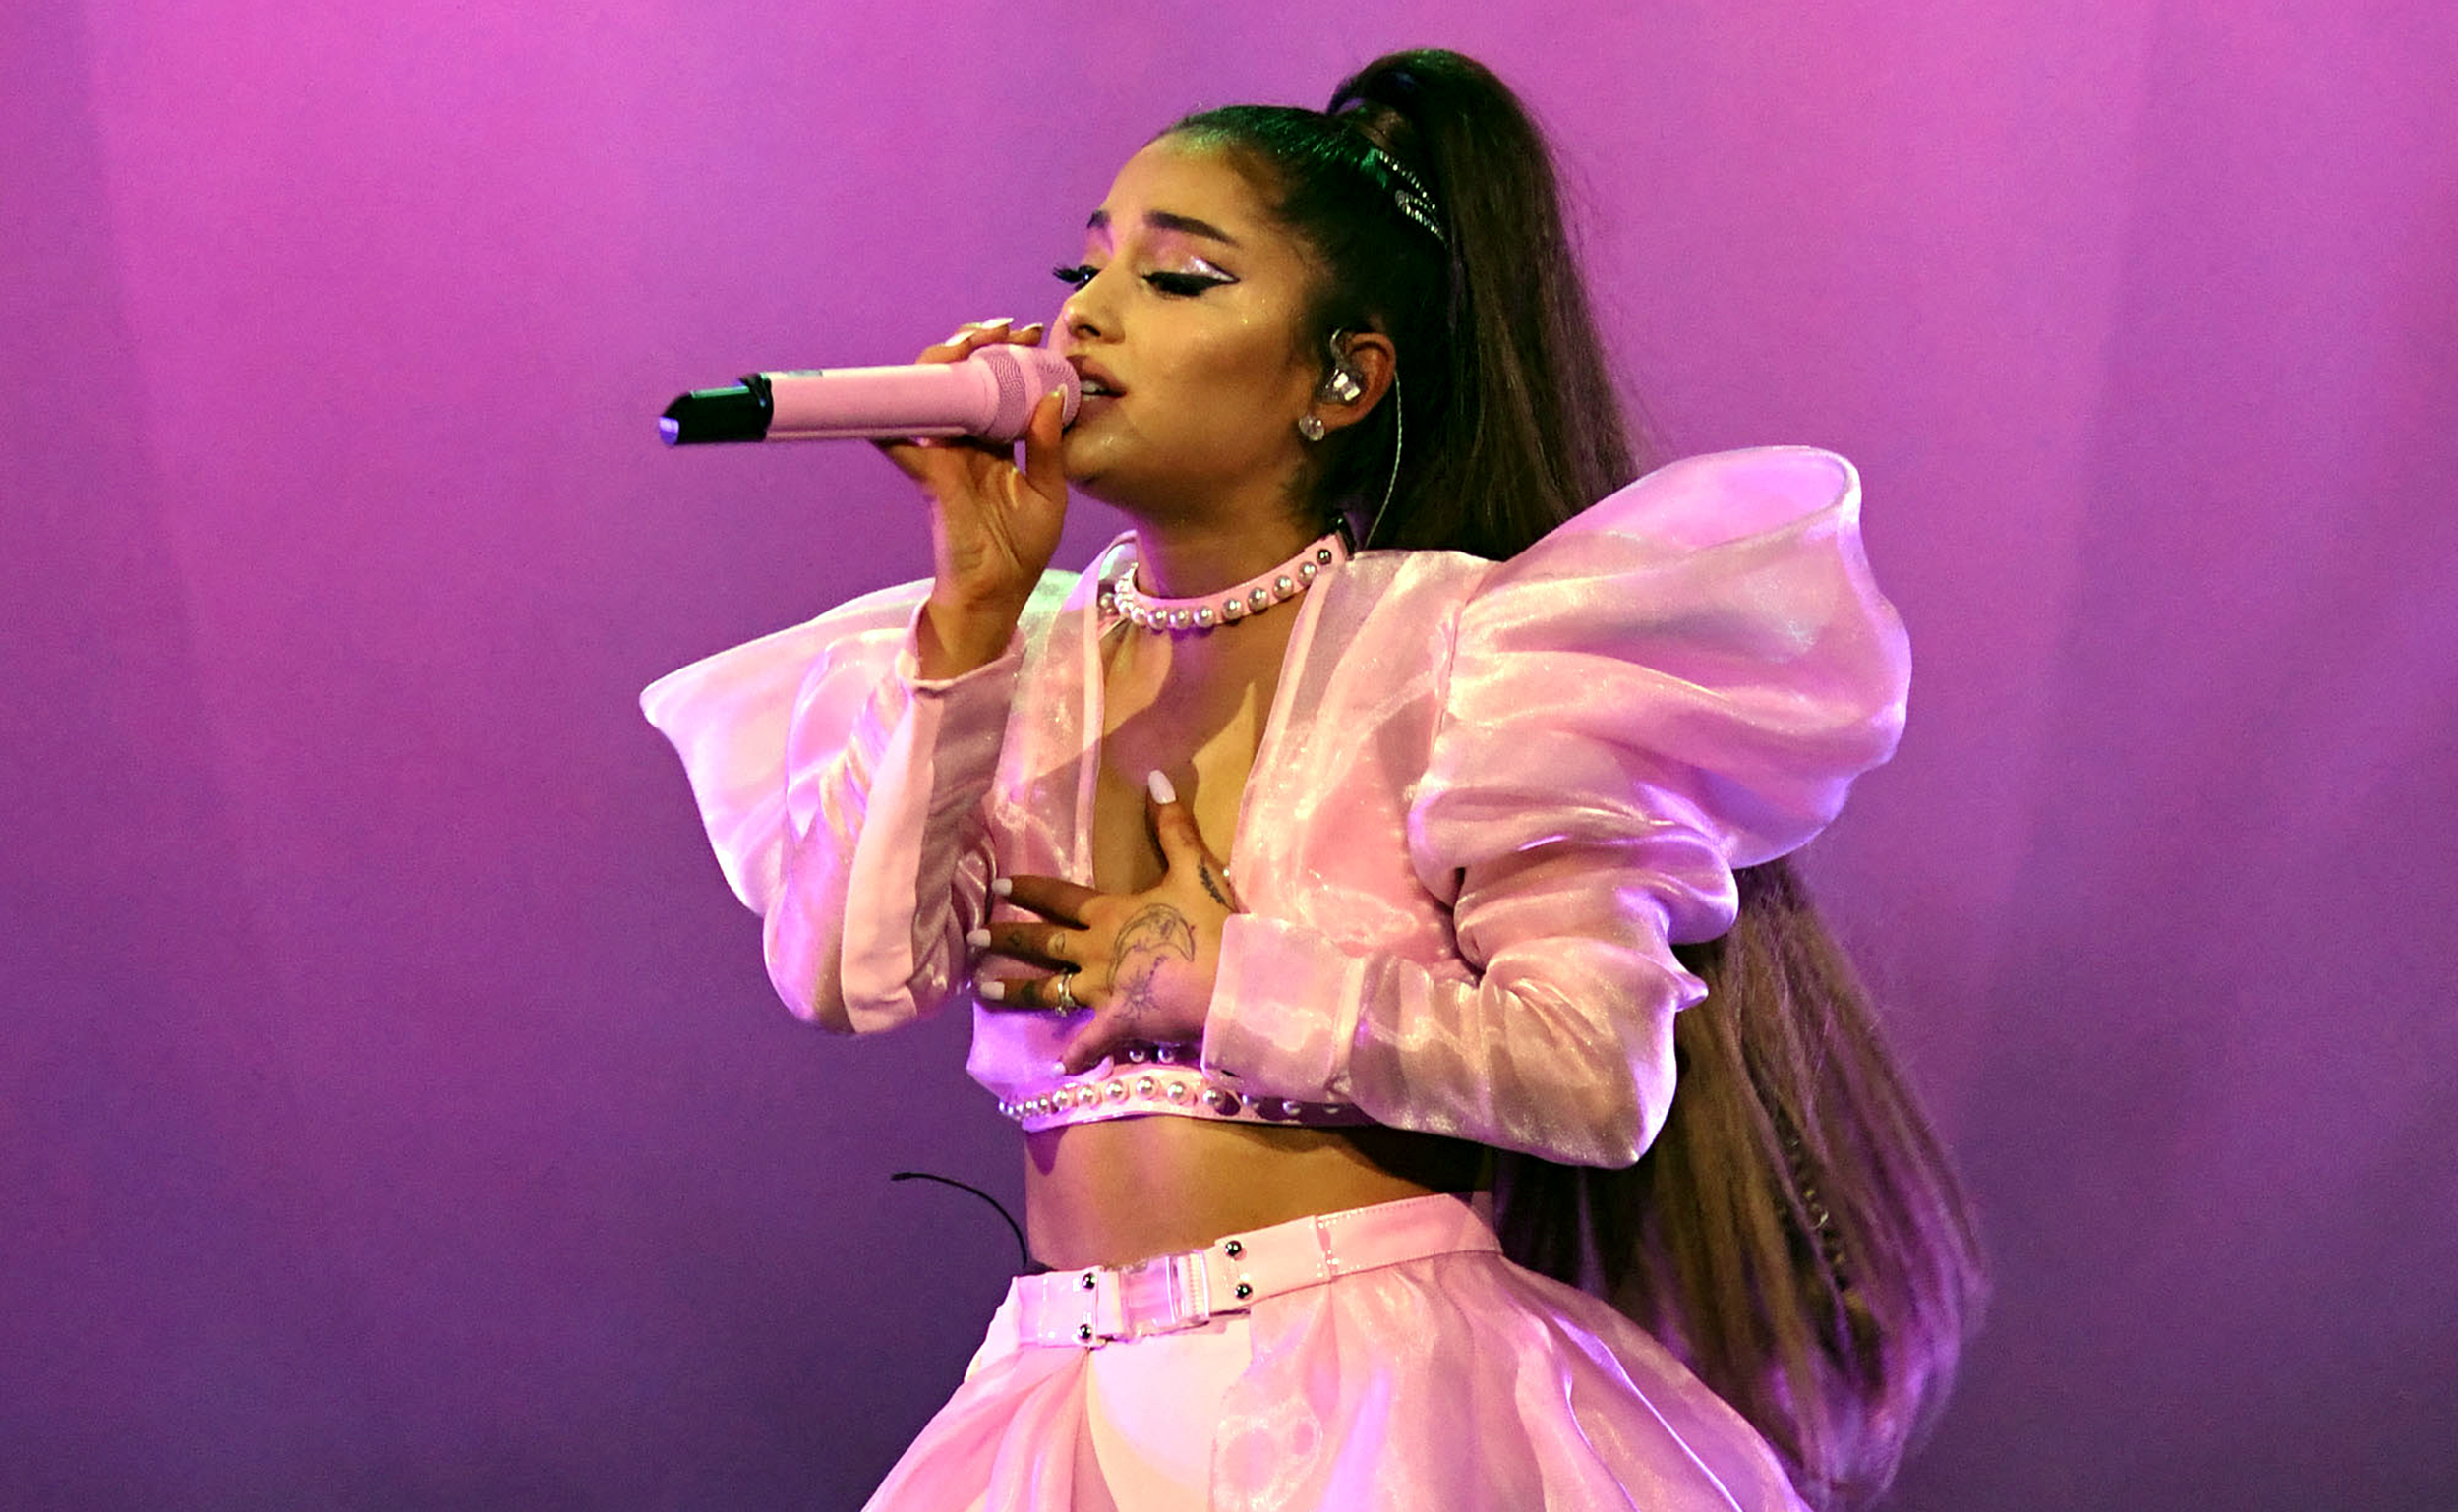 Ariana Grande performing live wearing a pink dress.